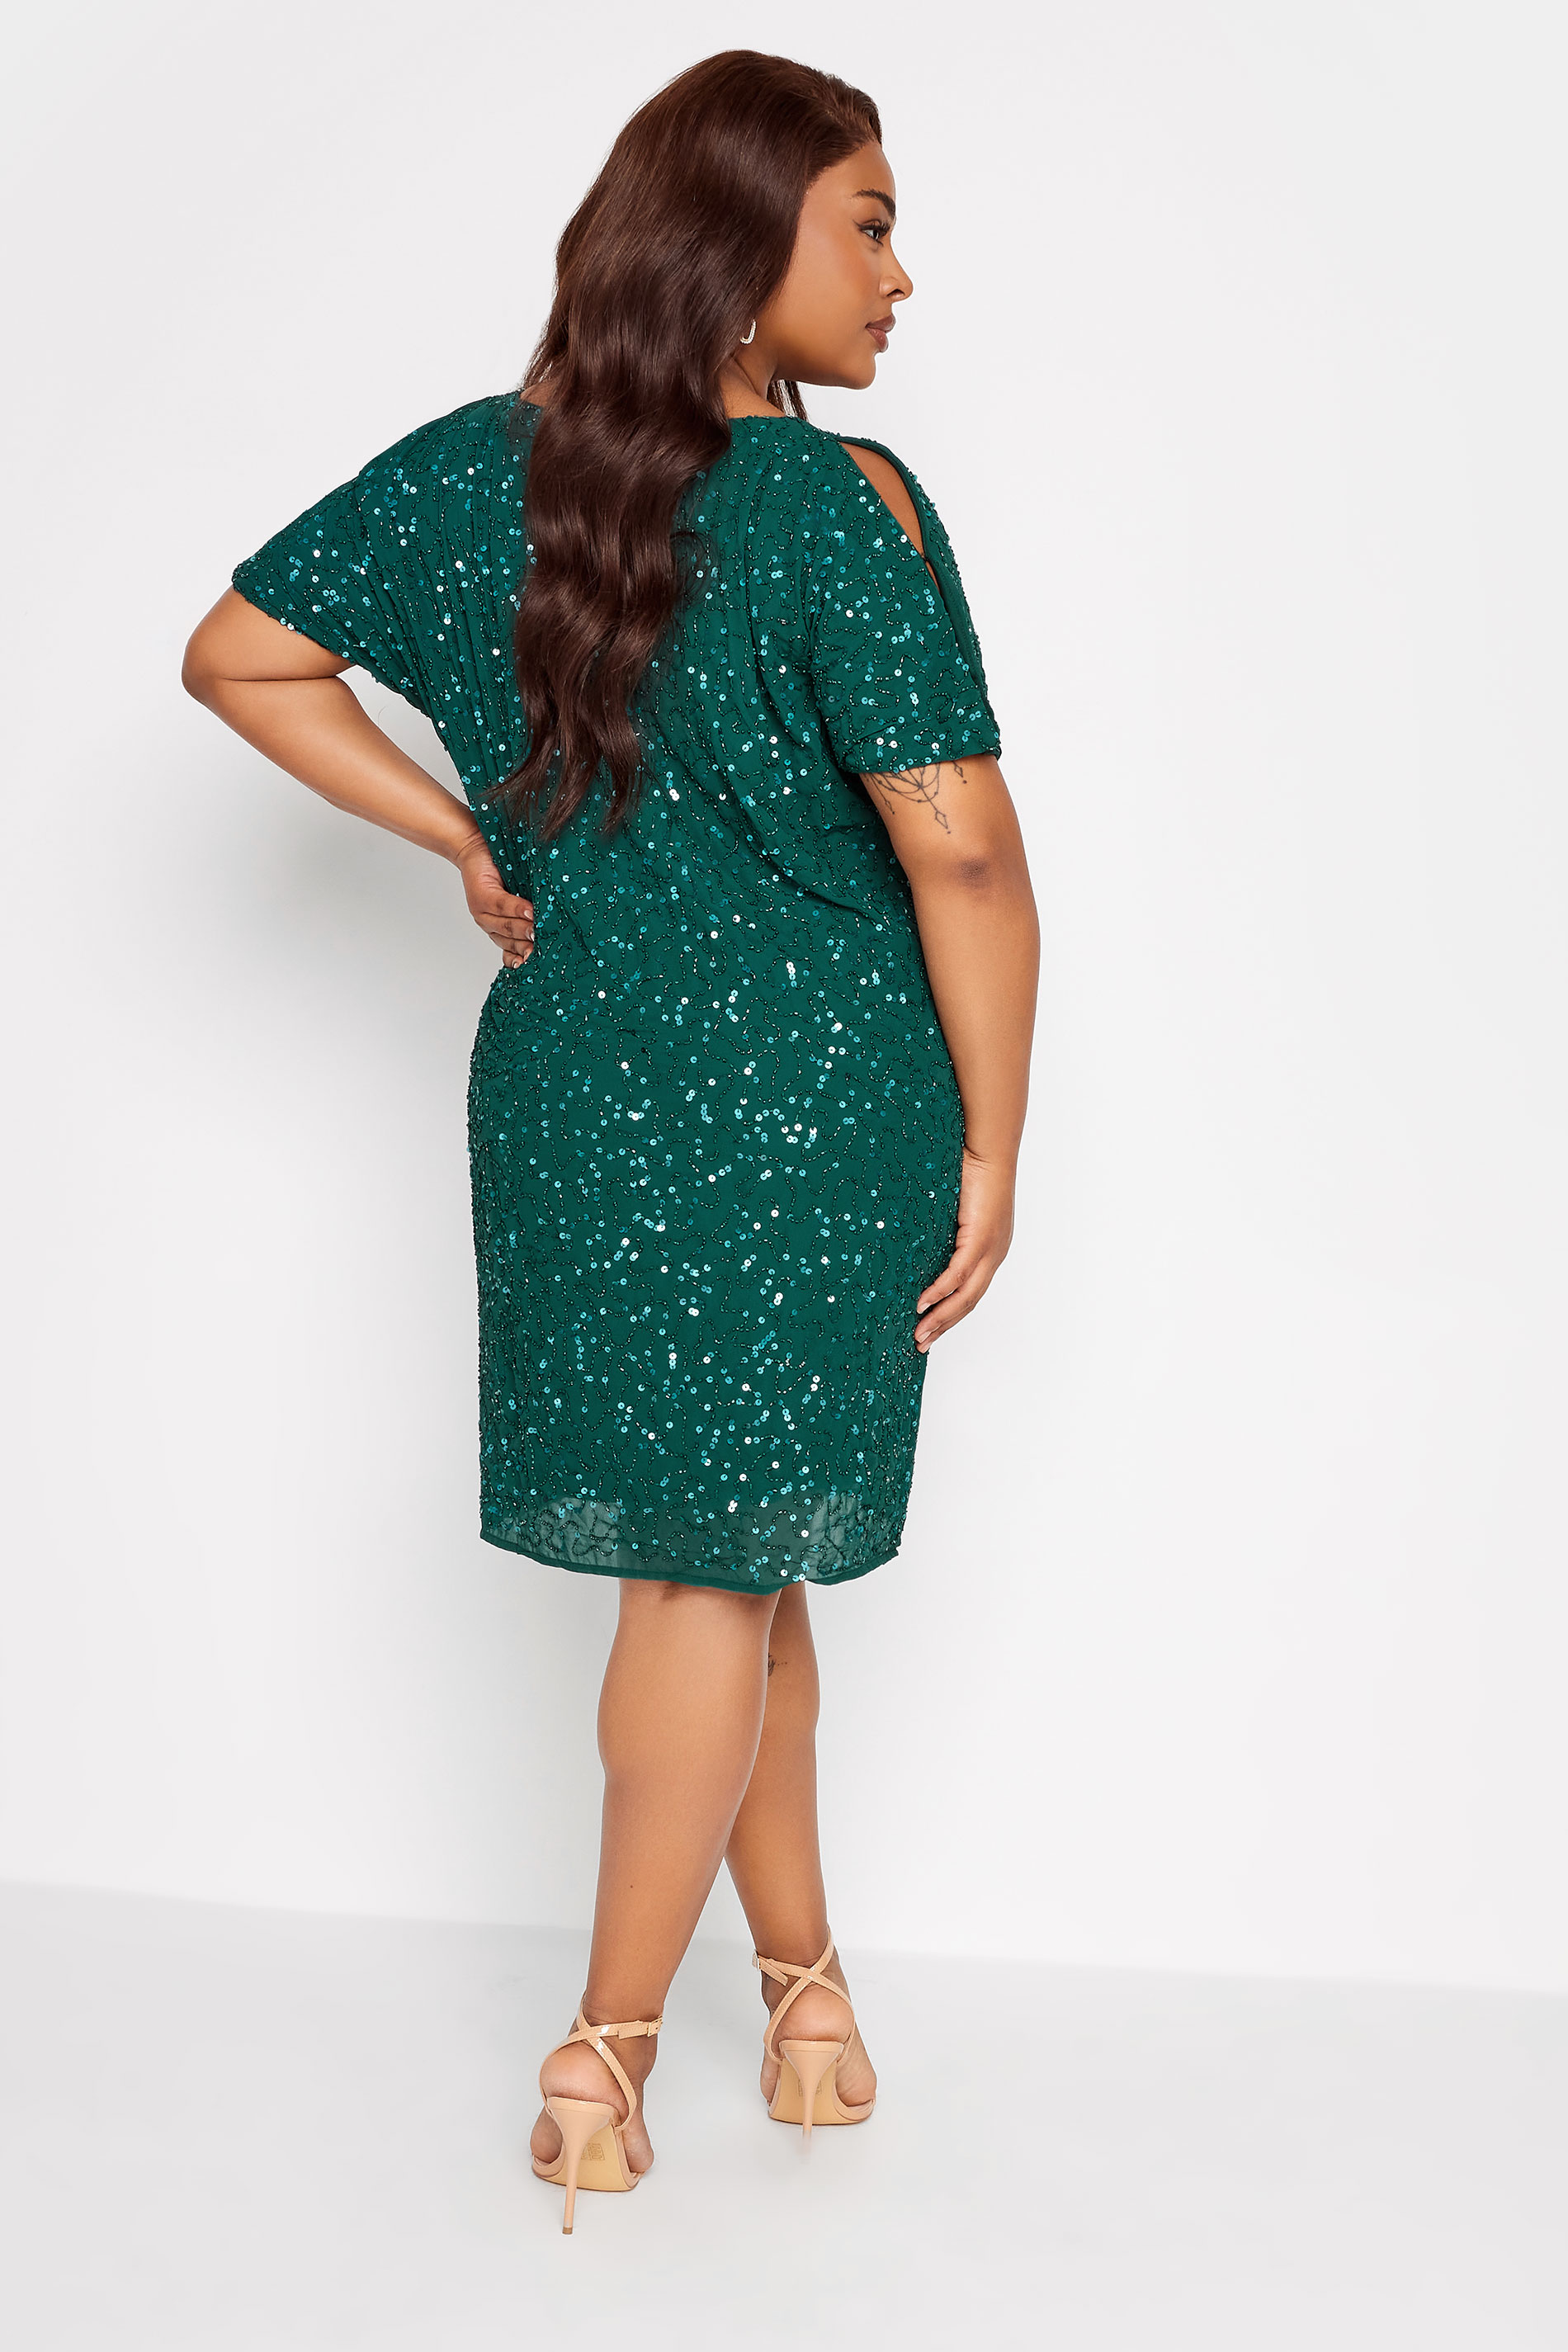 LUXE Plus Size Forest Green Sequin Hand Embellished Cape Dress | Yours Clothing 3